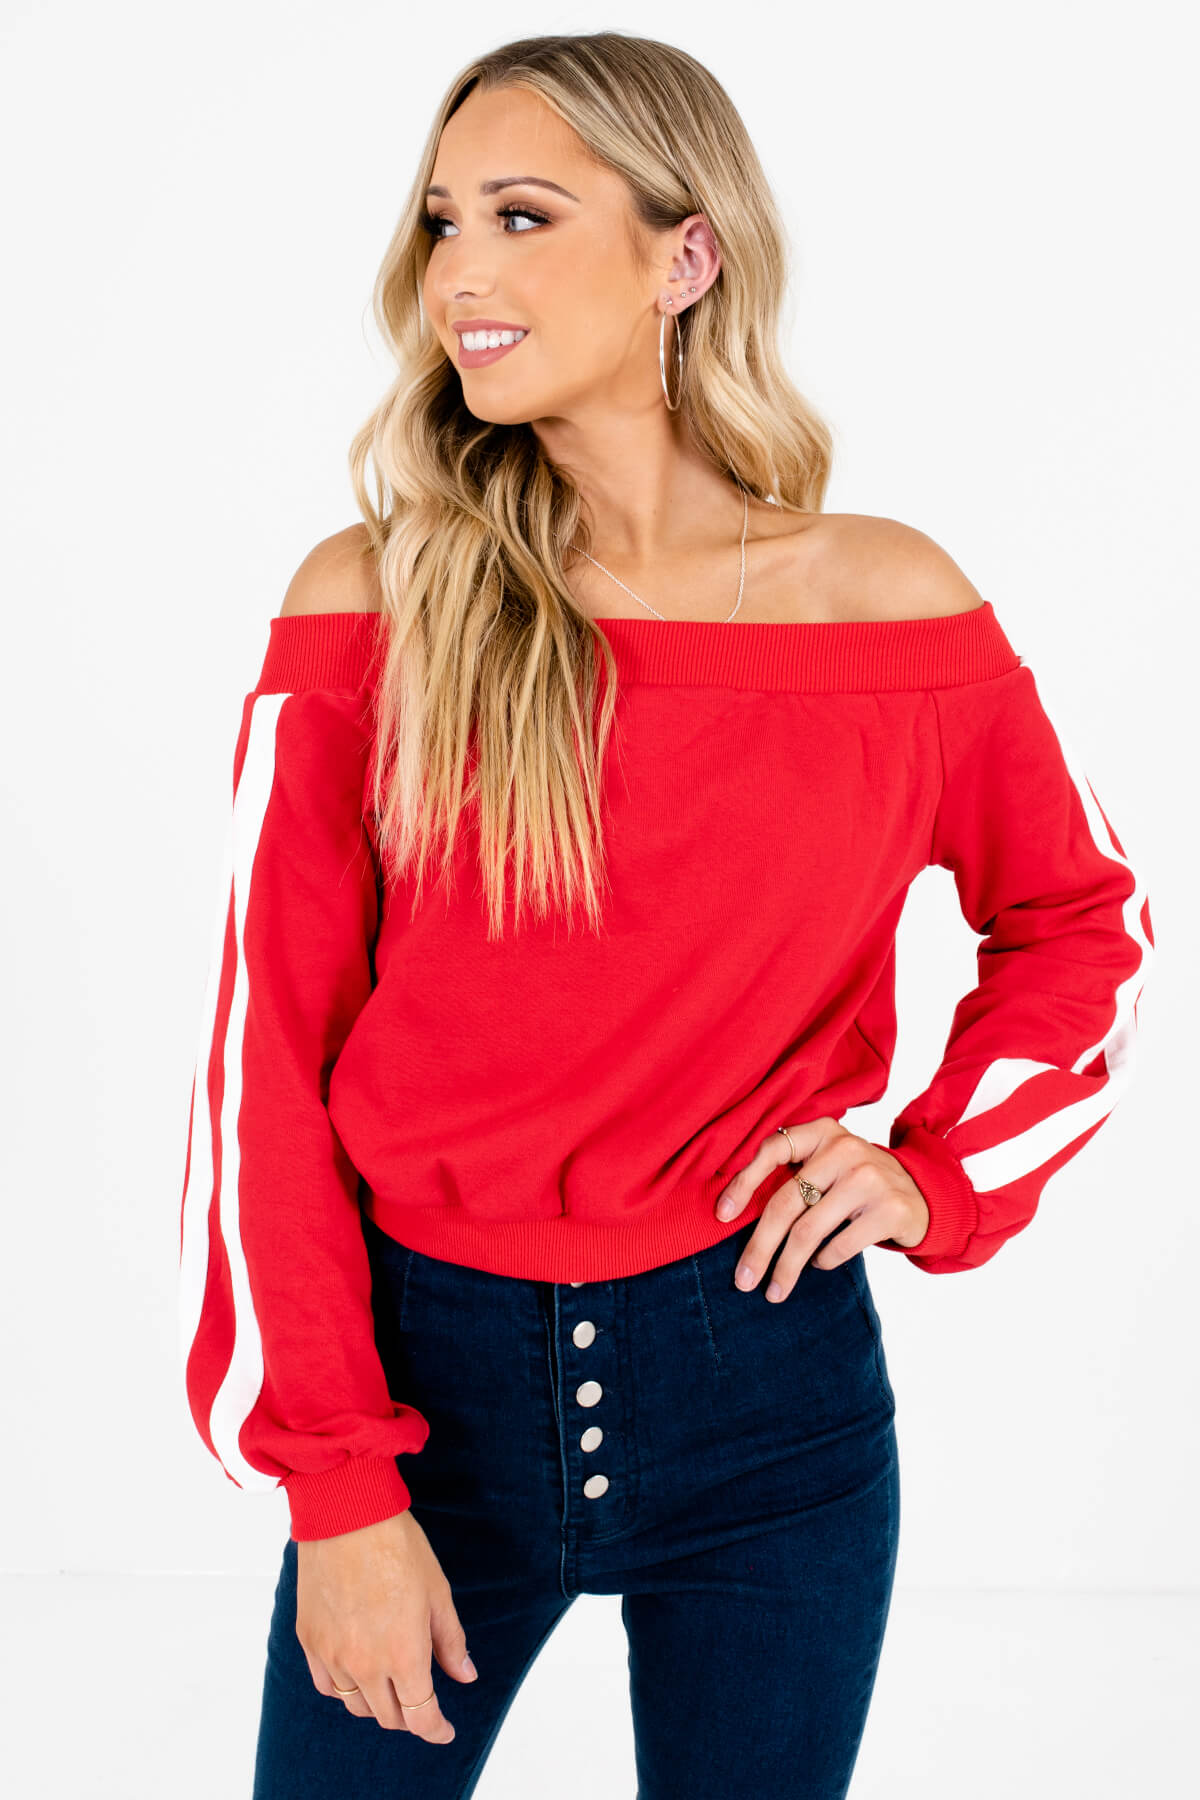 Red and White Warm and Cozy Boutique Pullovers for Women